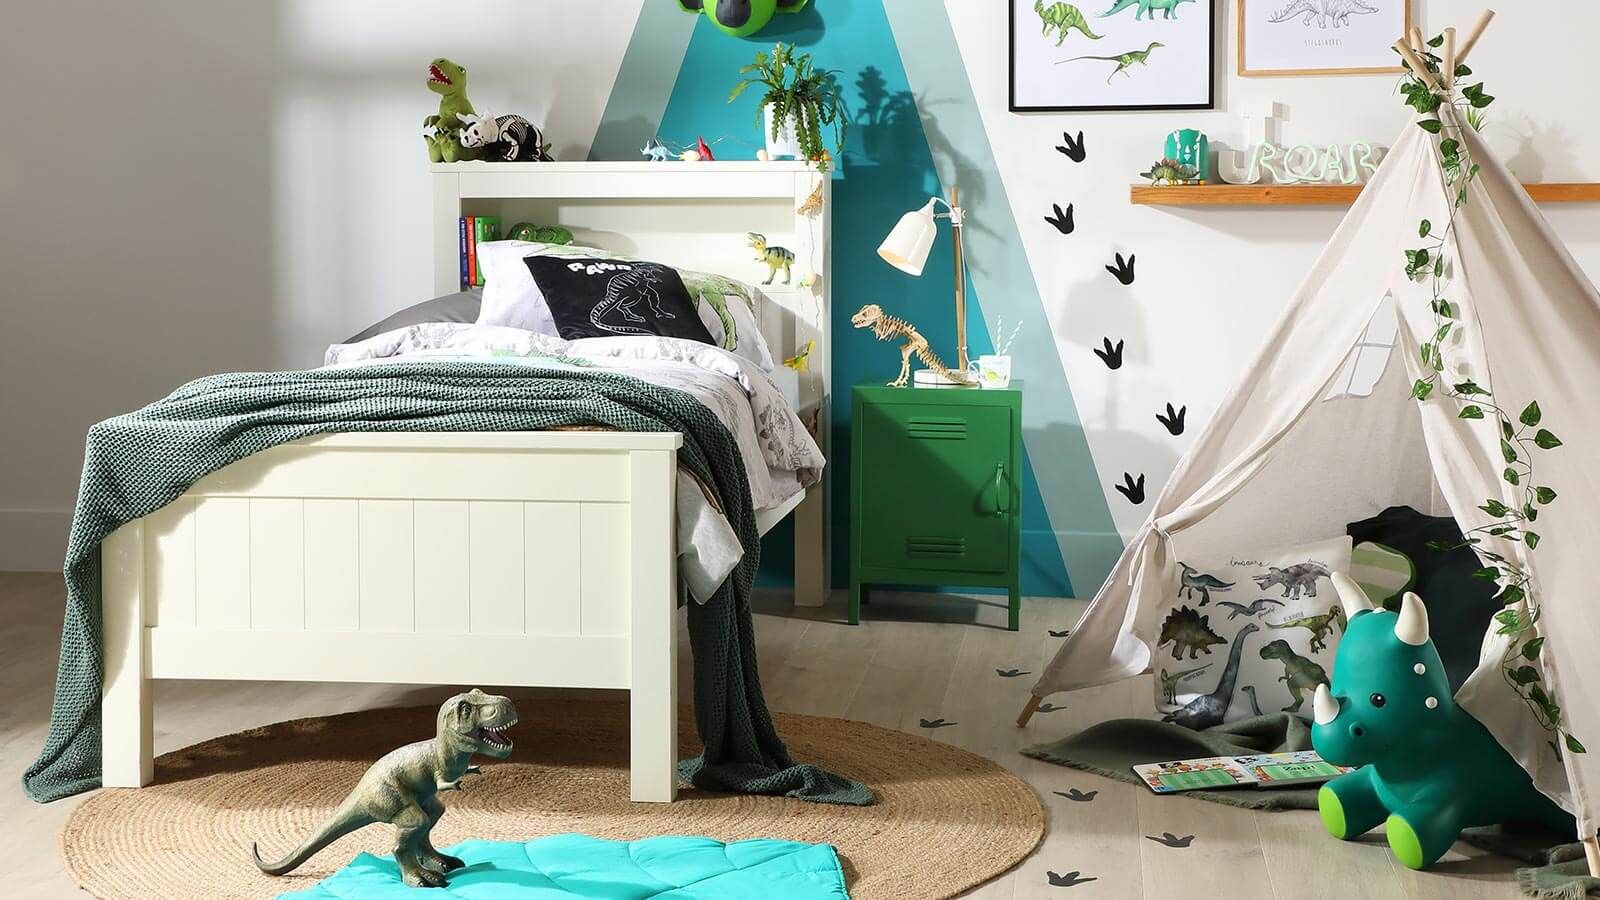 Instagram-worthy bedroom themes - from toddlers to teens